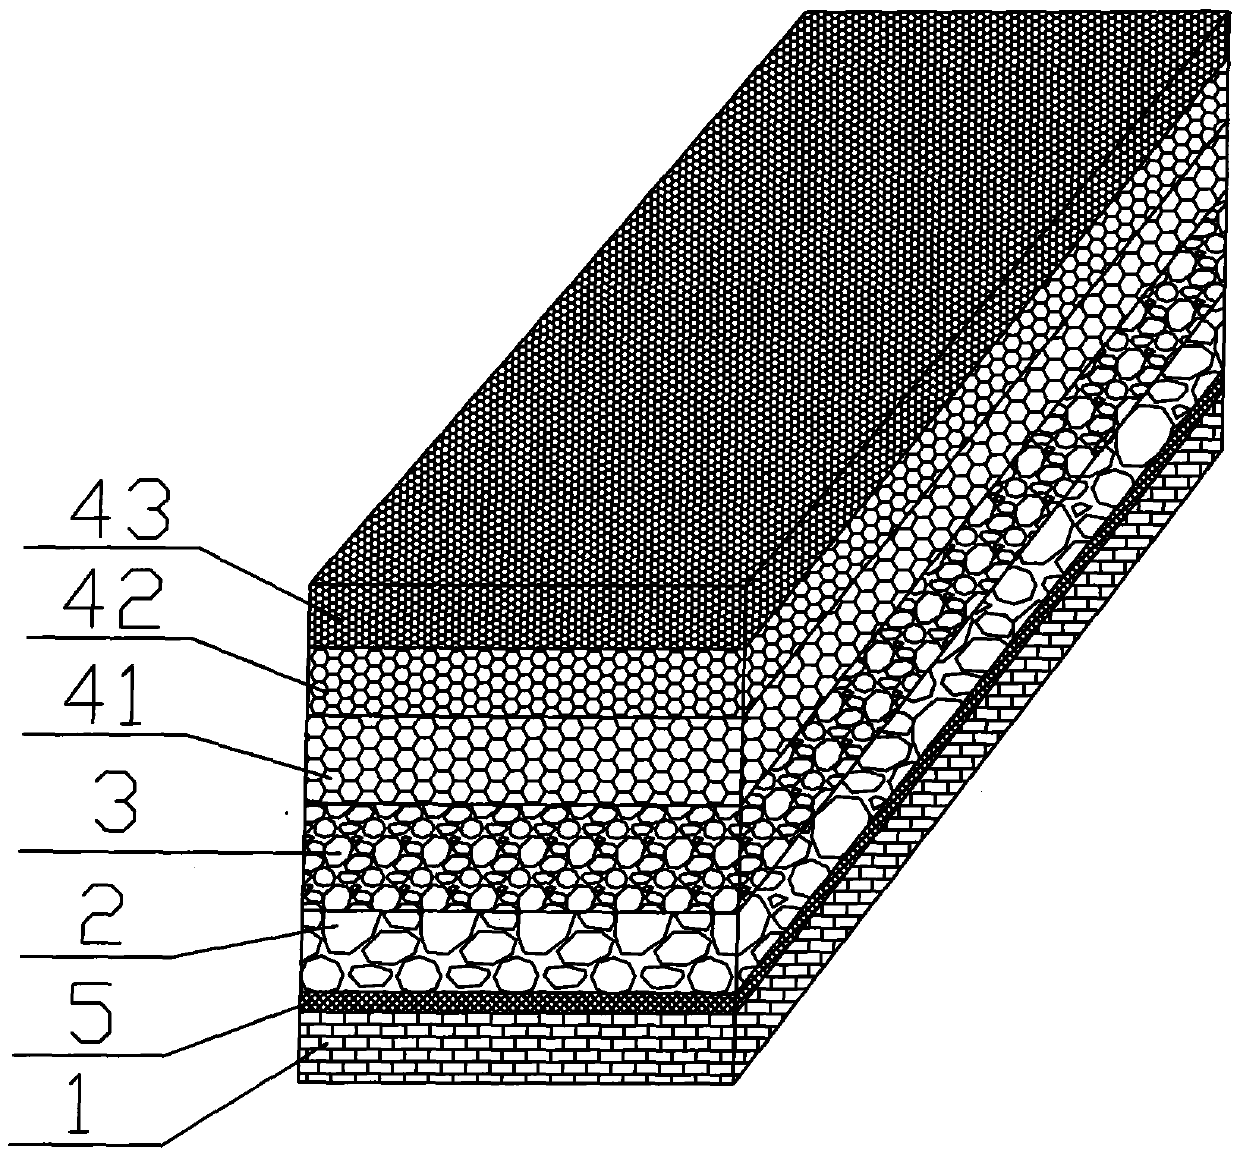 Asphalt concrete pavement structure and laying technology thereof